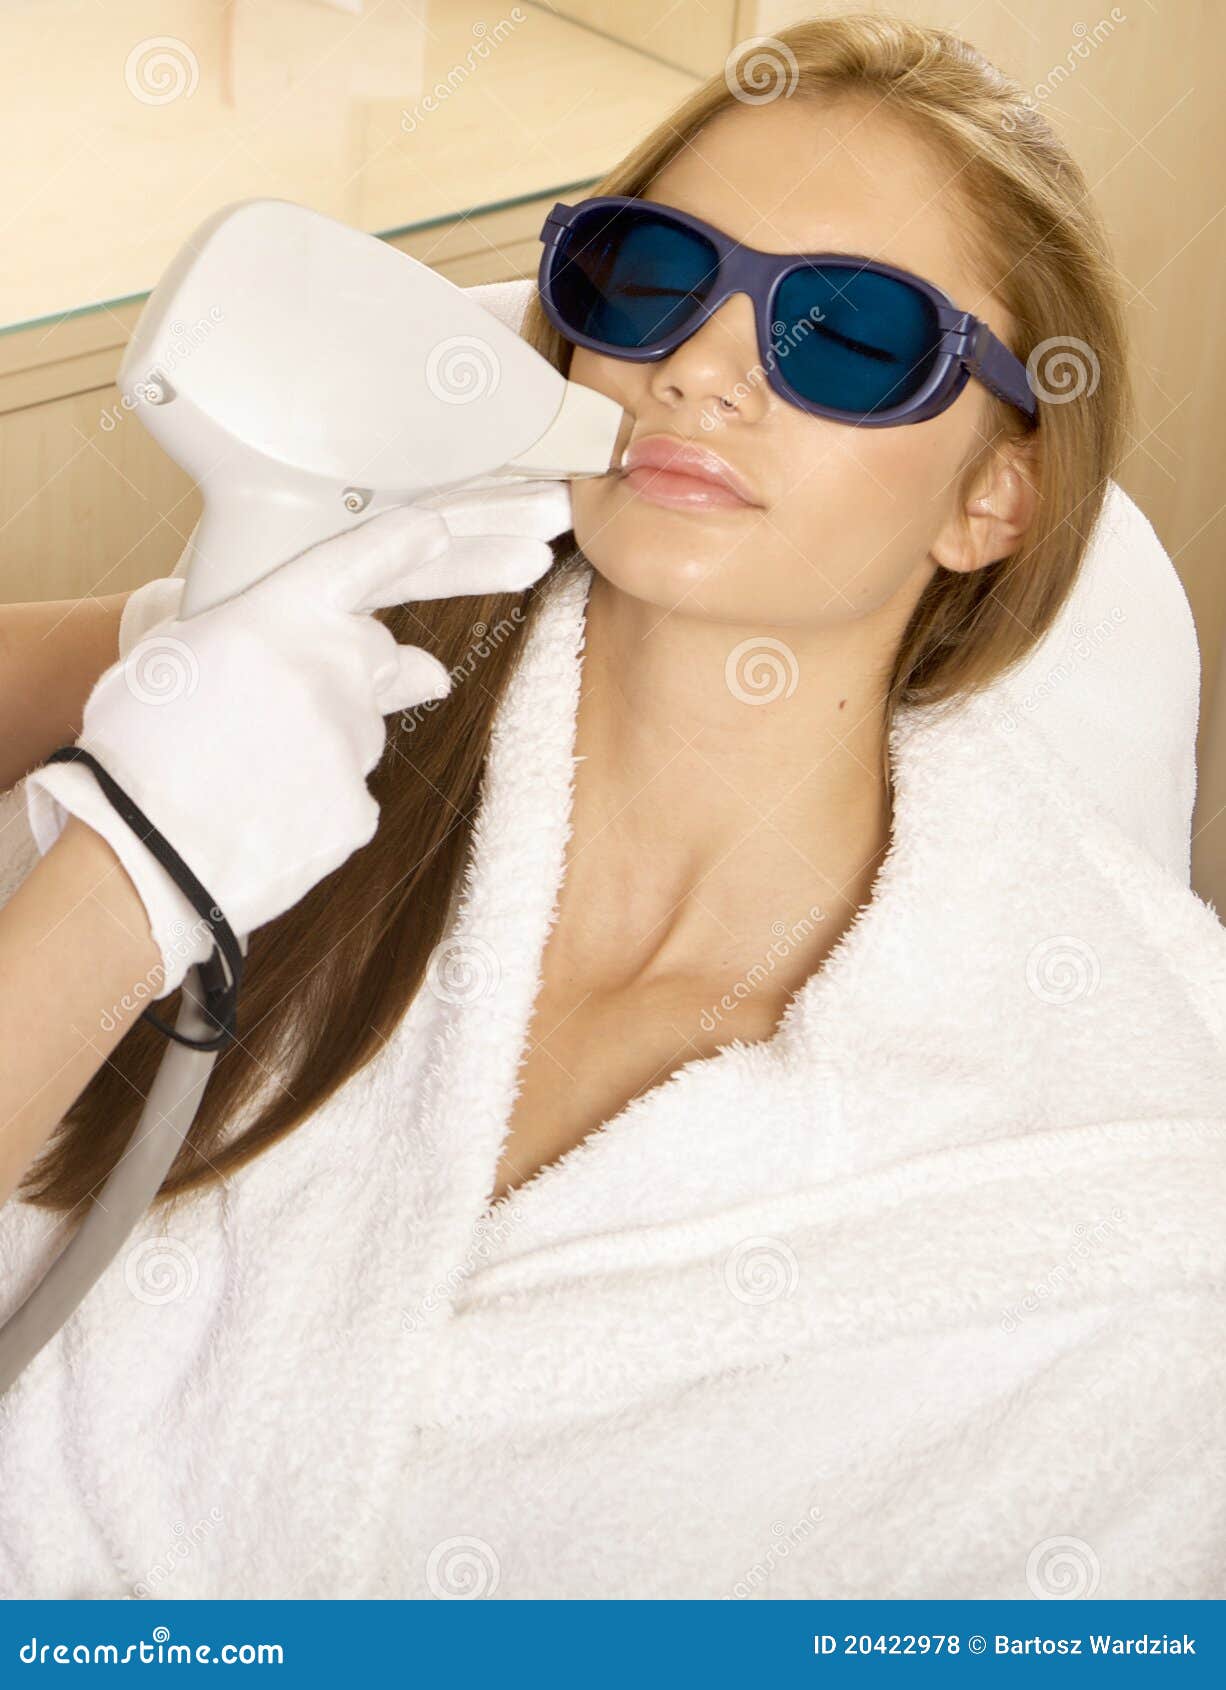 laser hair removal in professional studio.